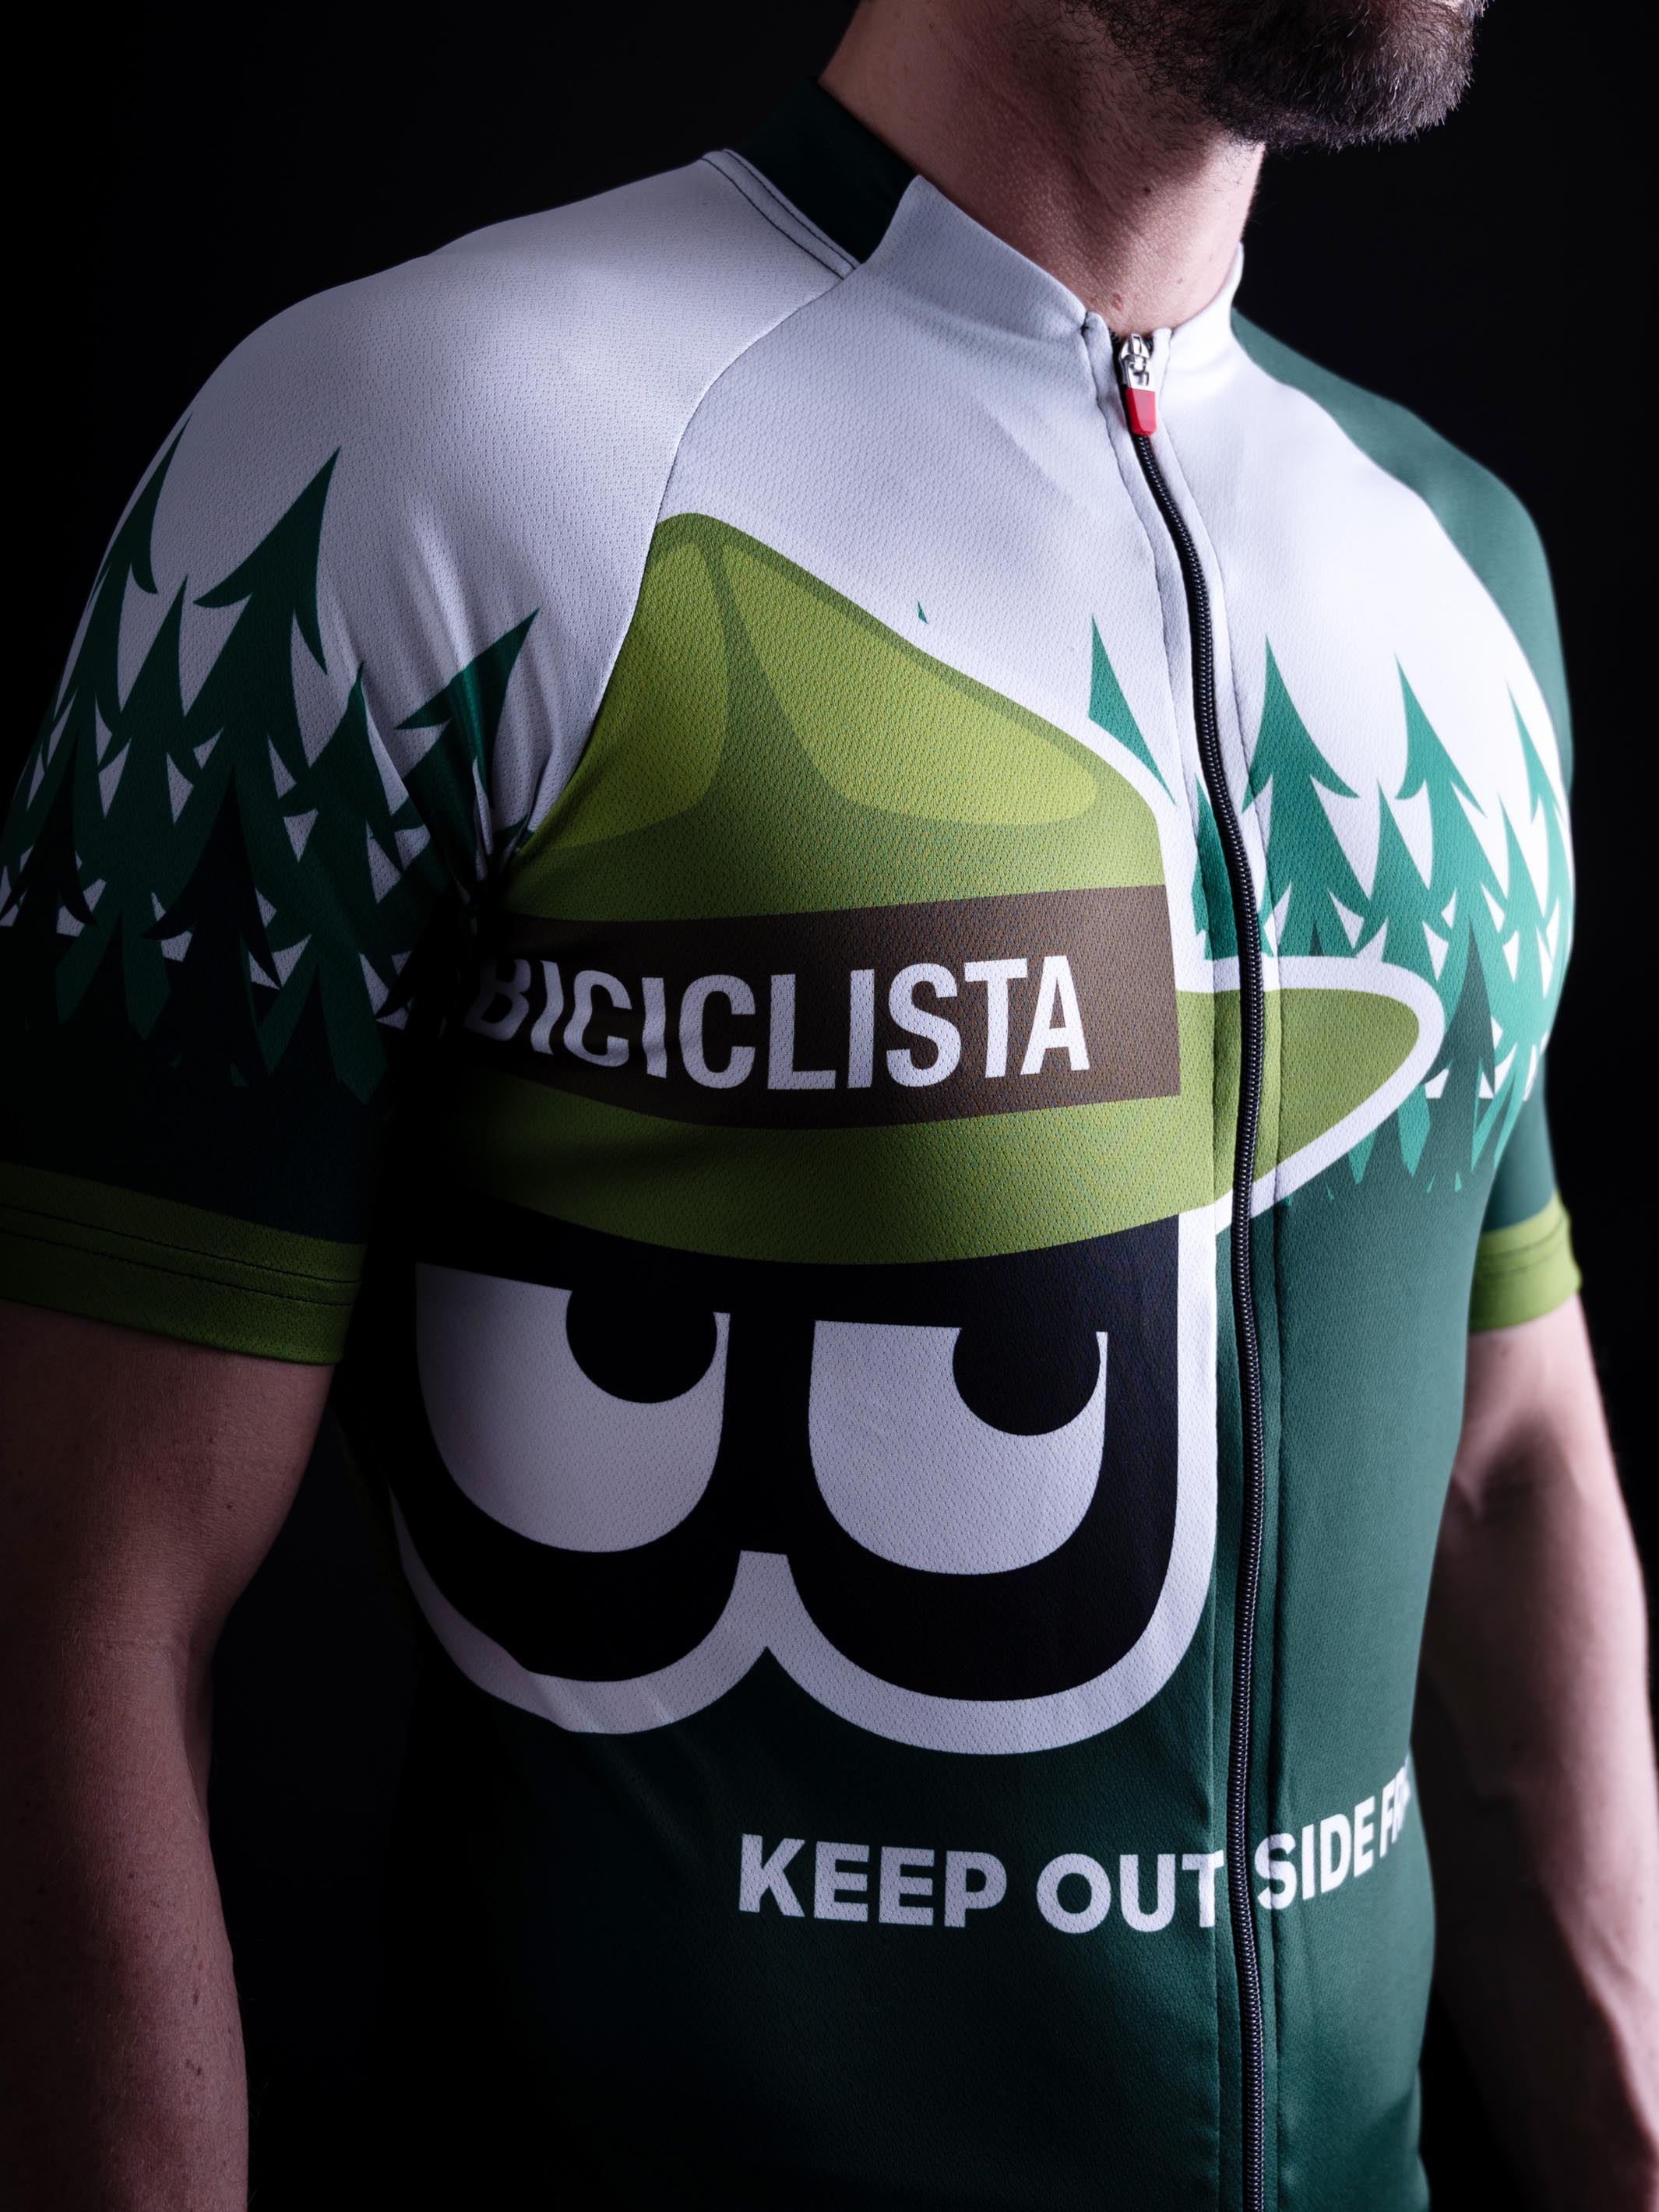 OUTSIDEISFREE - Men's Right-on Jersey